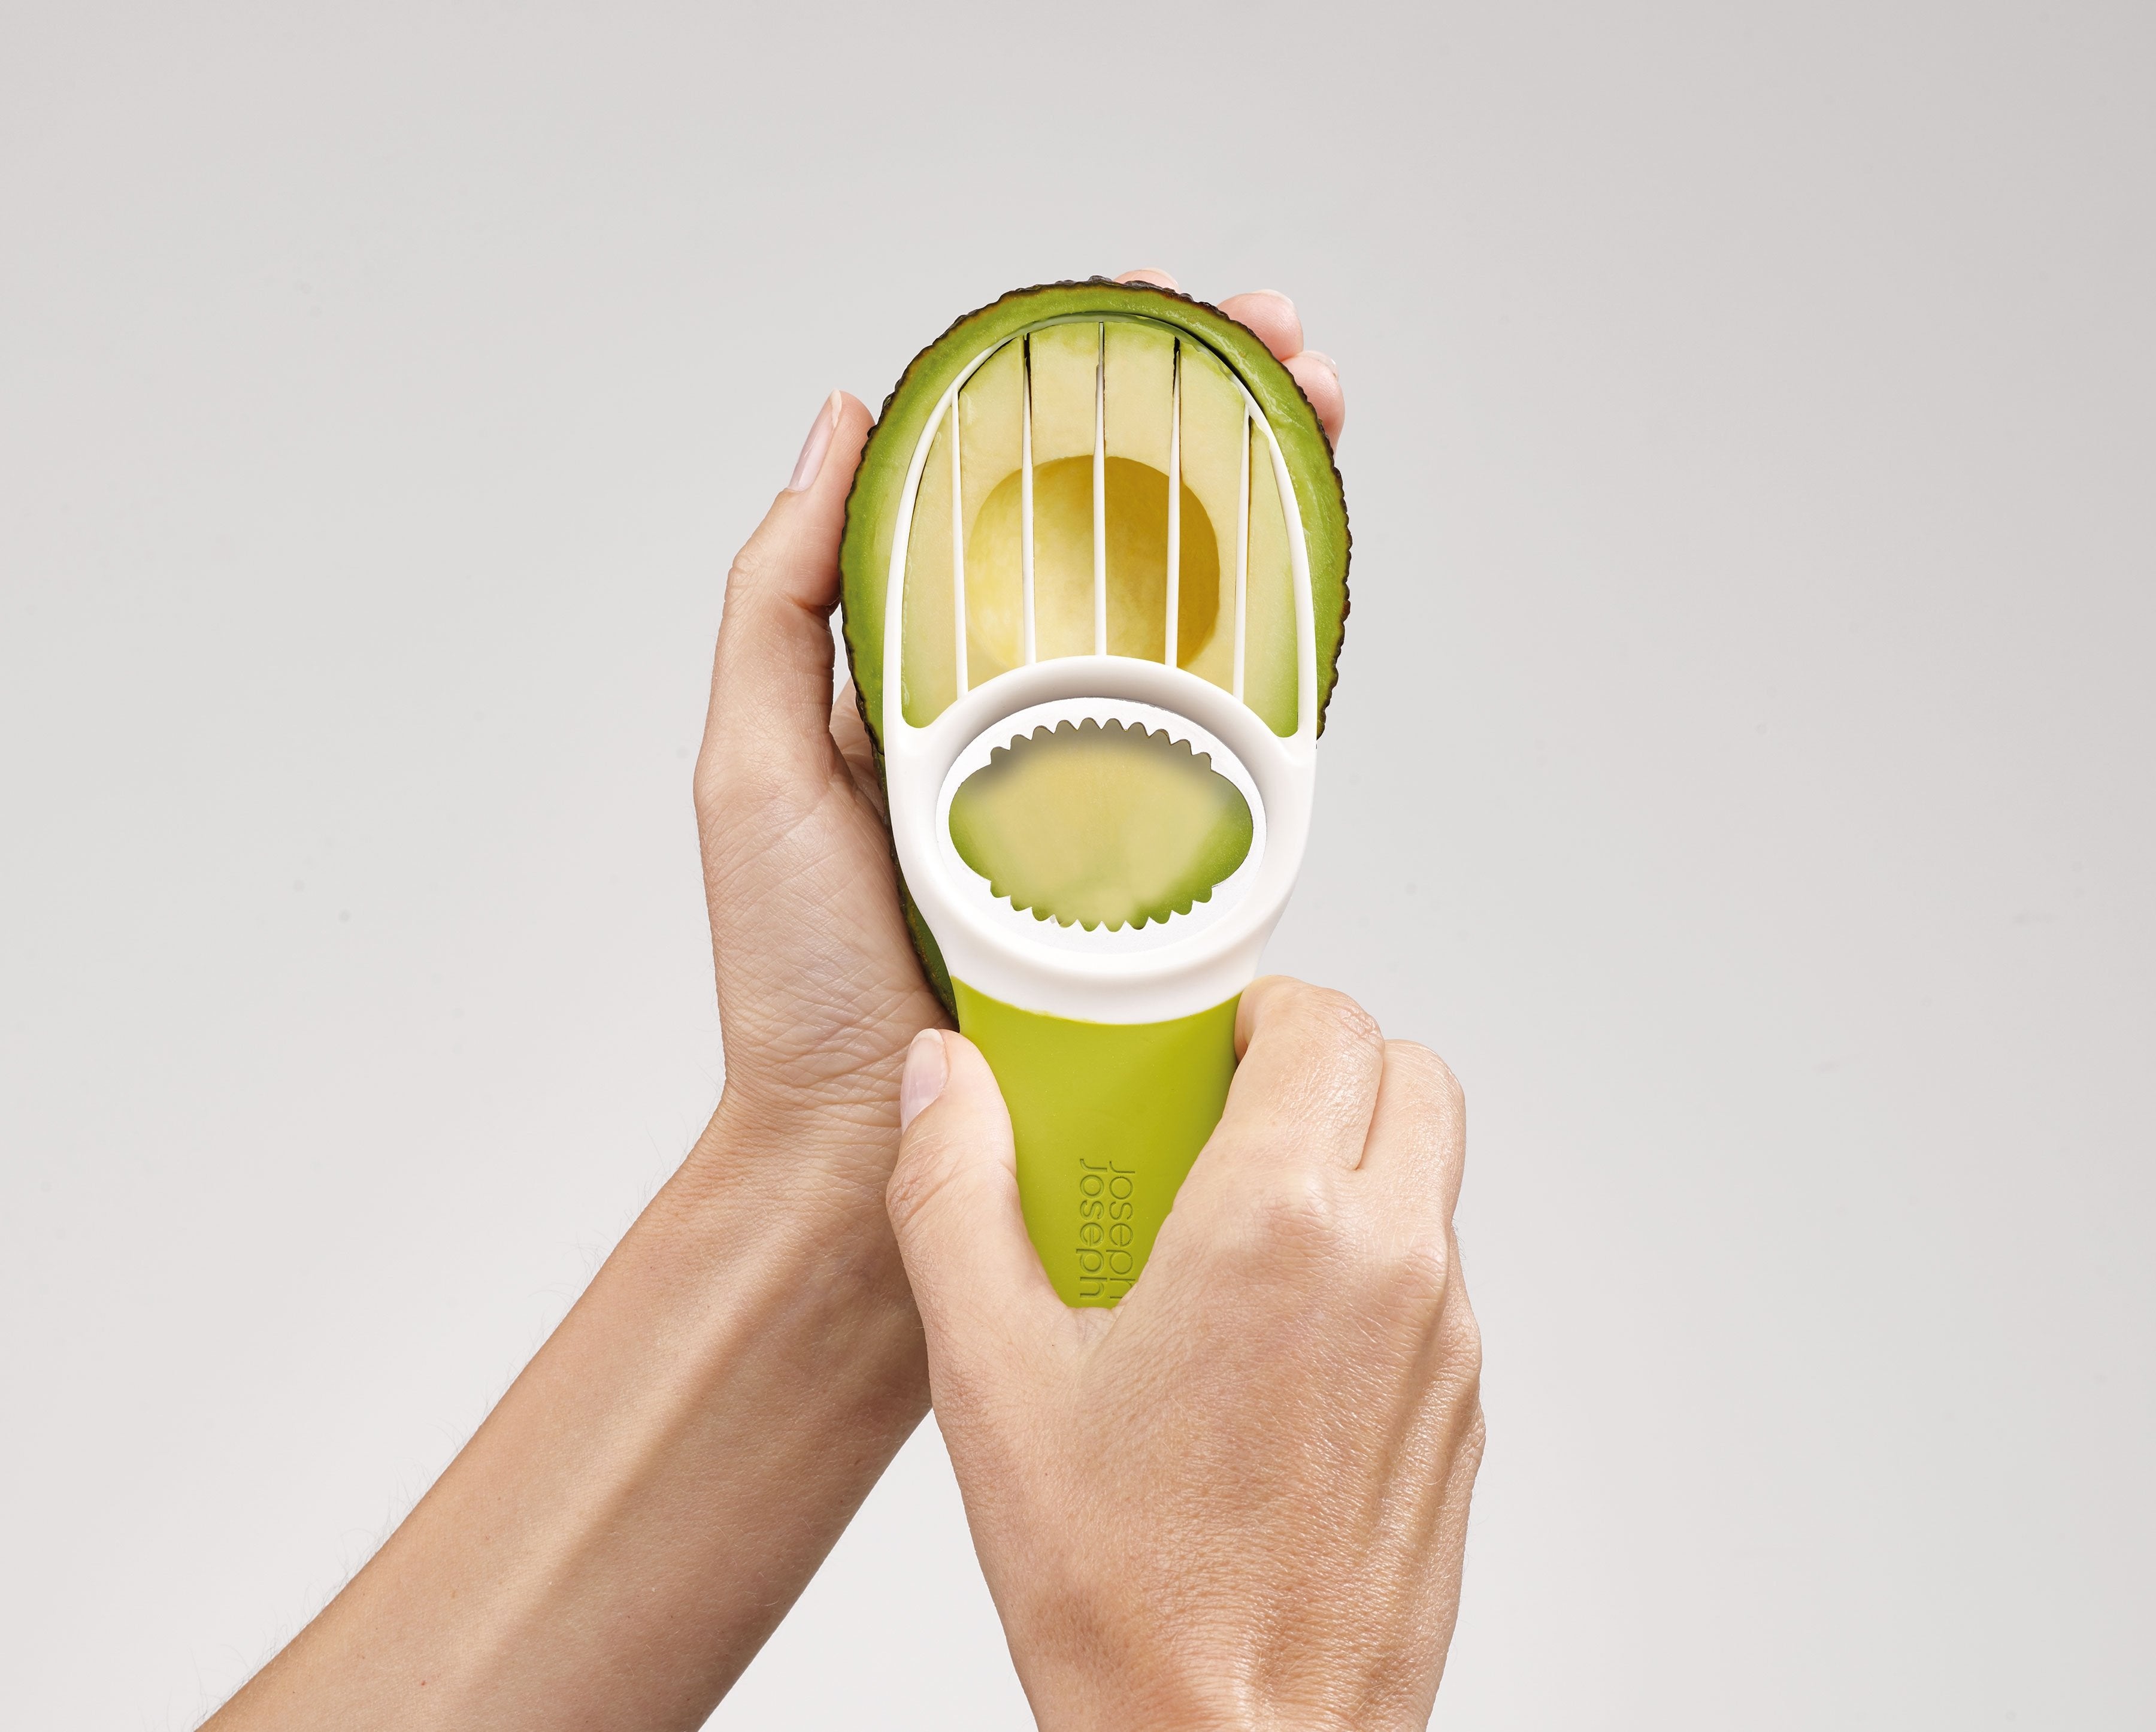 BEON.COM.AU  This avocado tool allows you to safely cut, de-stone, scoop and slice avocados all in one handy gadget.  Cuts, de-stones and slices in one Versatile slice & scoop head Stainless-steel pitter to safely remove stone Folding plastic blade for safe storage Ergonomic, soft-grip handle  Specificat... Joseph Joseph at BEON.COM.AU